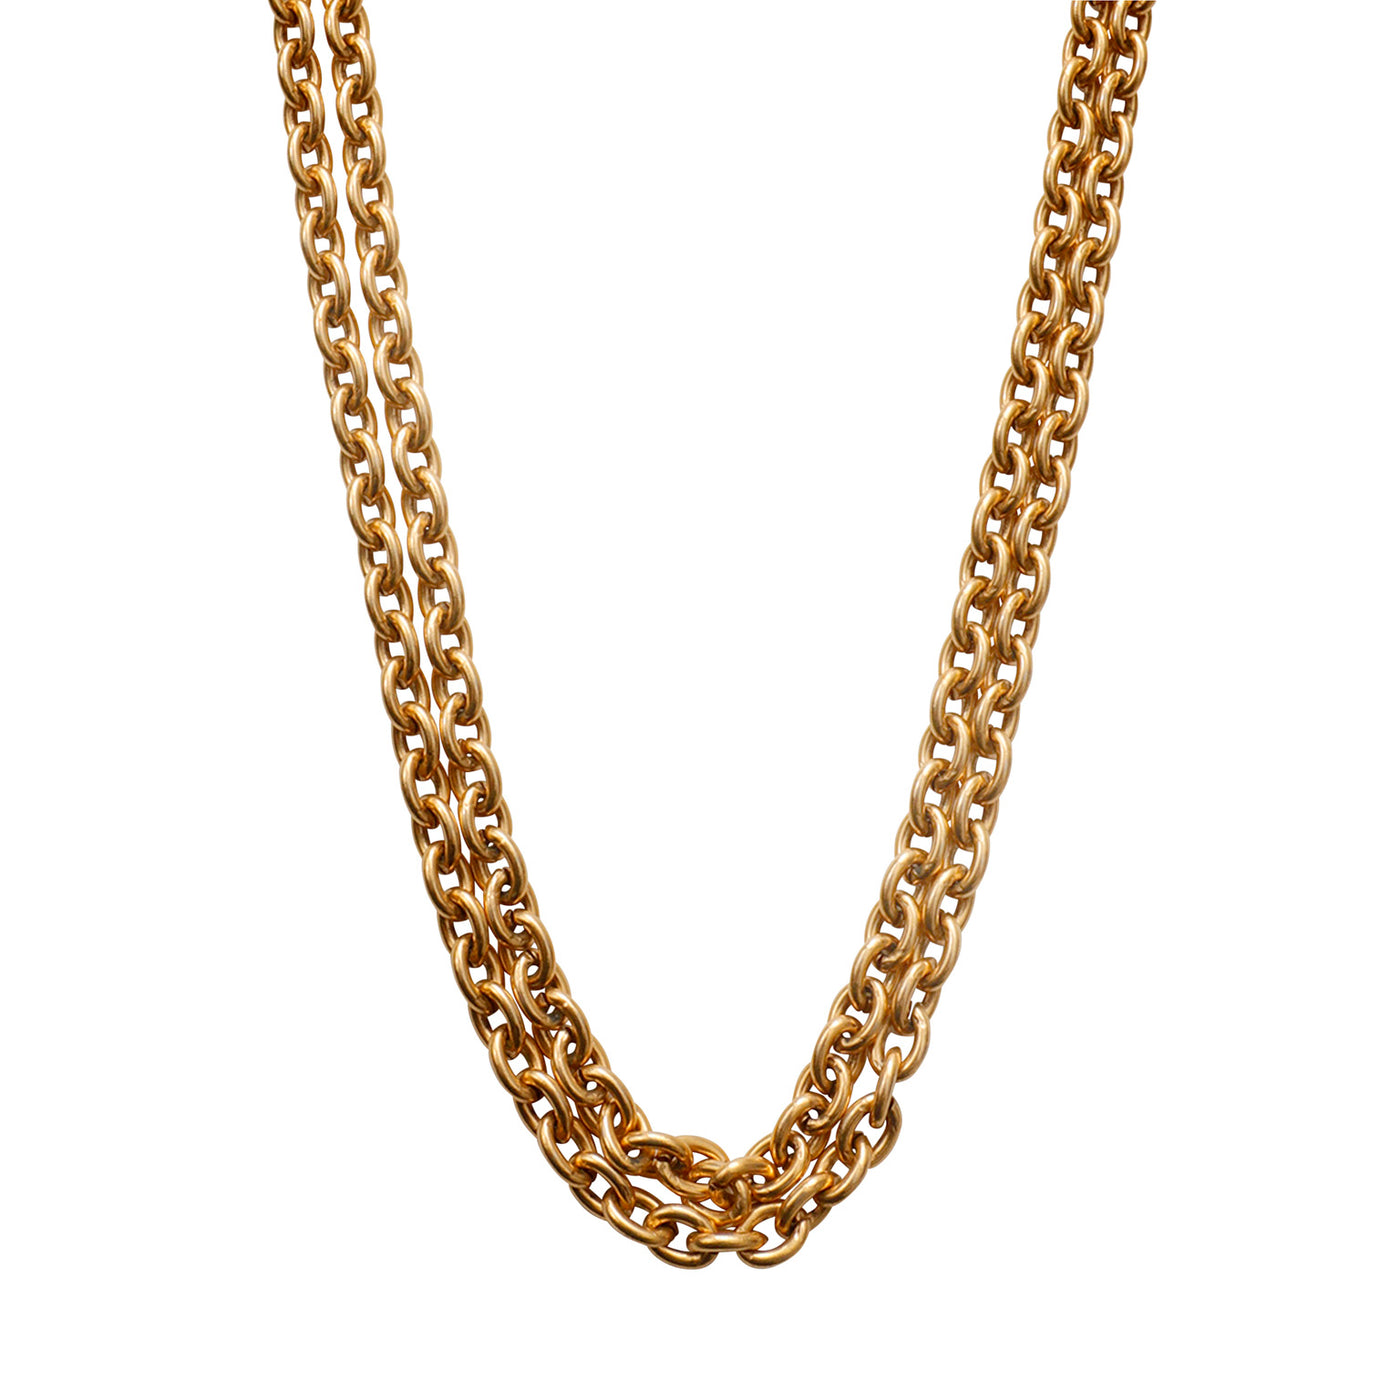 Chanel Vintage Gold Link Double Chain Necklace